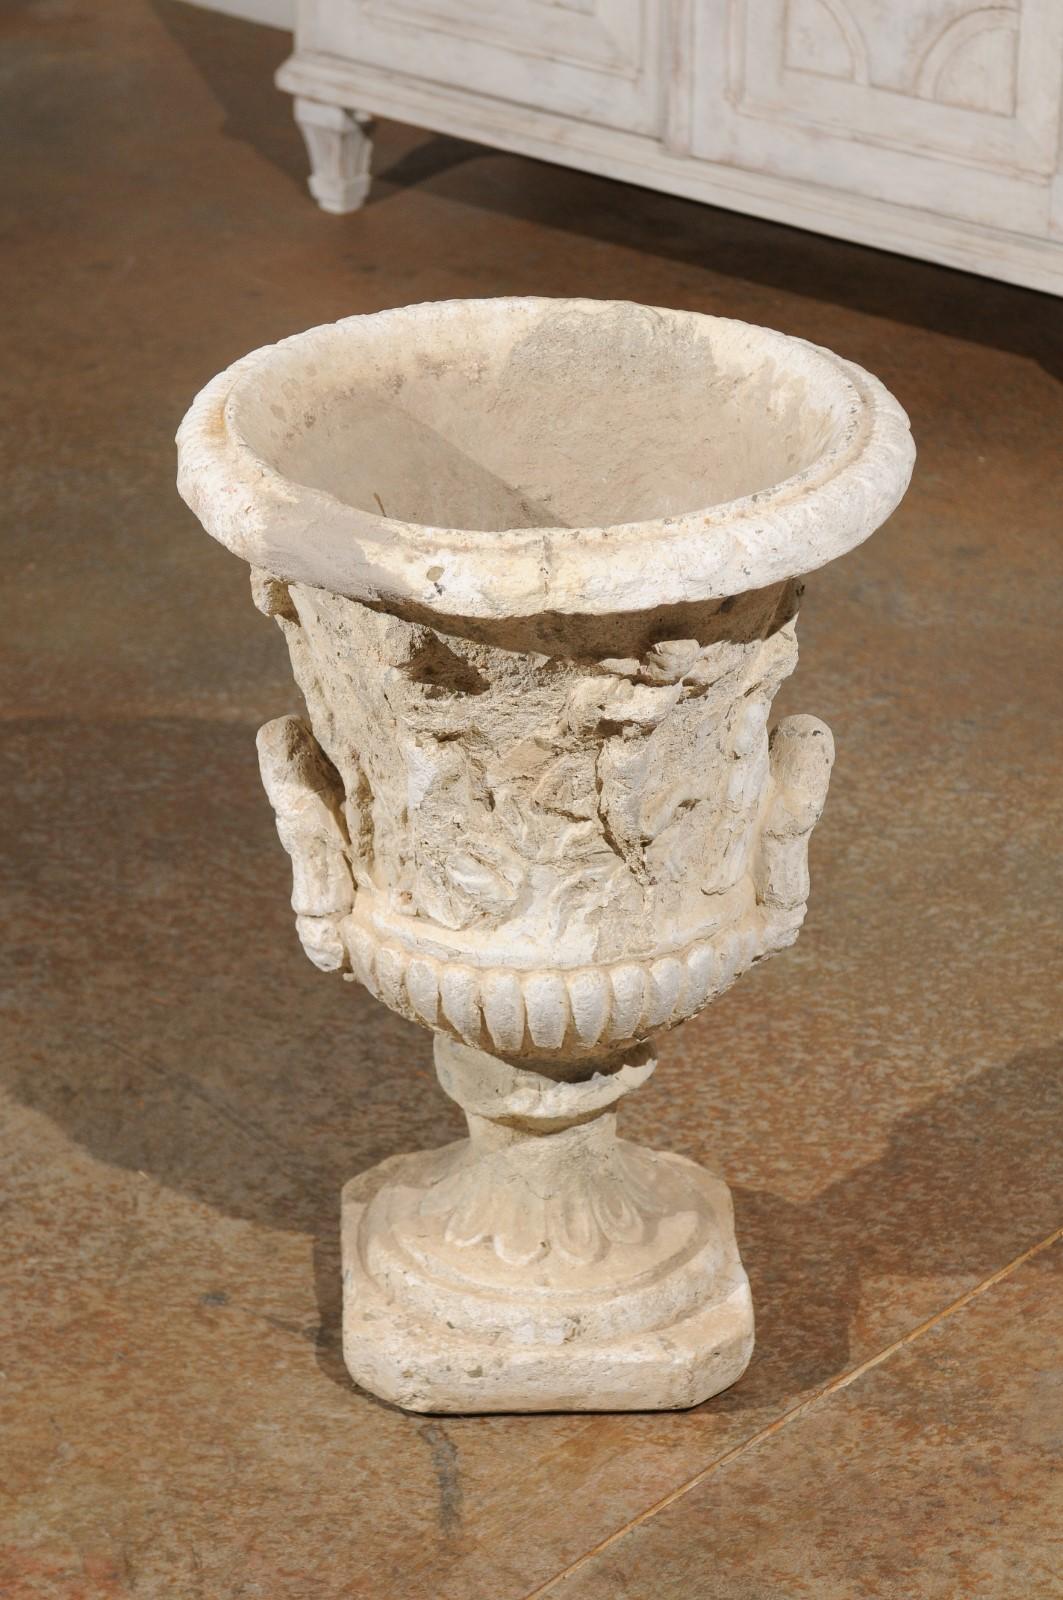 Stone French Provençale Medici Vase Inspired Jardinière with Carved Scenes, circa 1870 For Sale